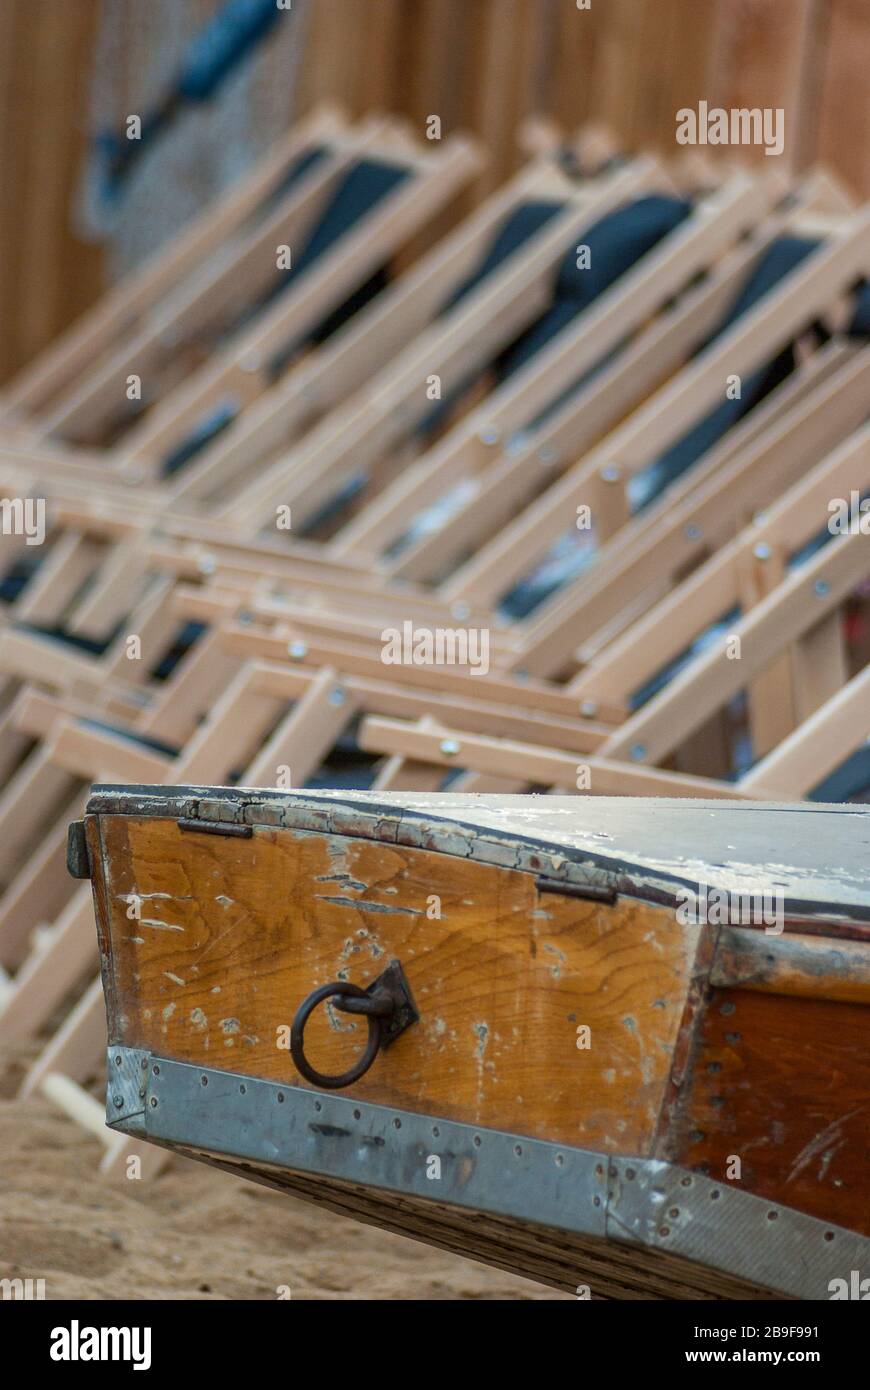 the boat tail of a wooden rowing boat and in the background a series of suspended empty deckchairs lined up in order on the beach in the sand, das Hec Stock Photo